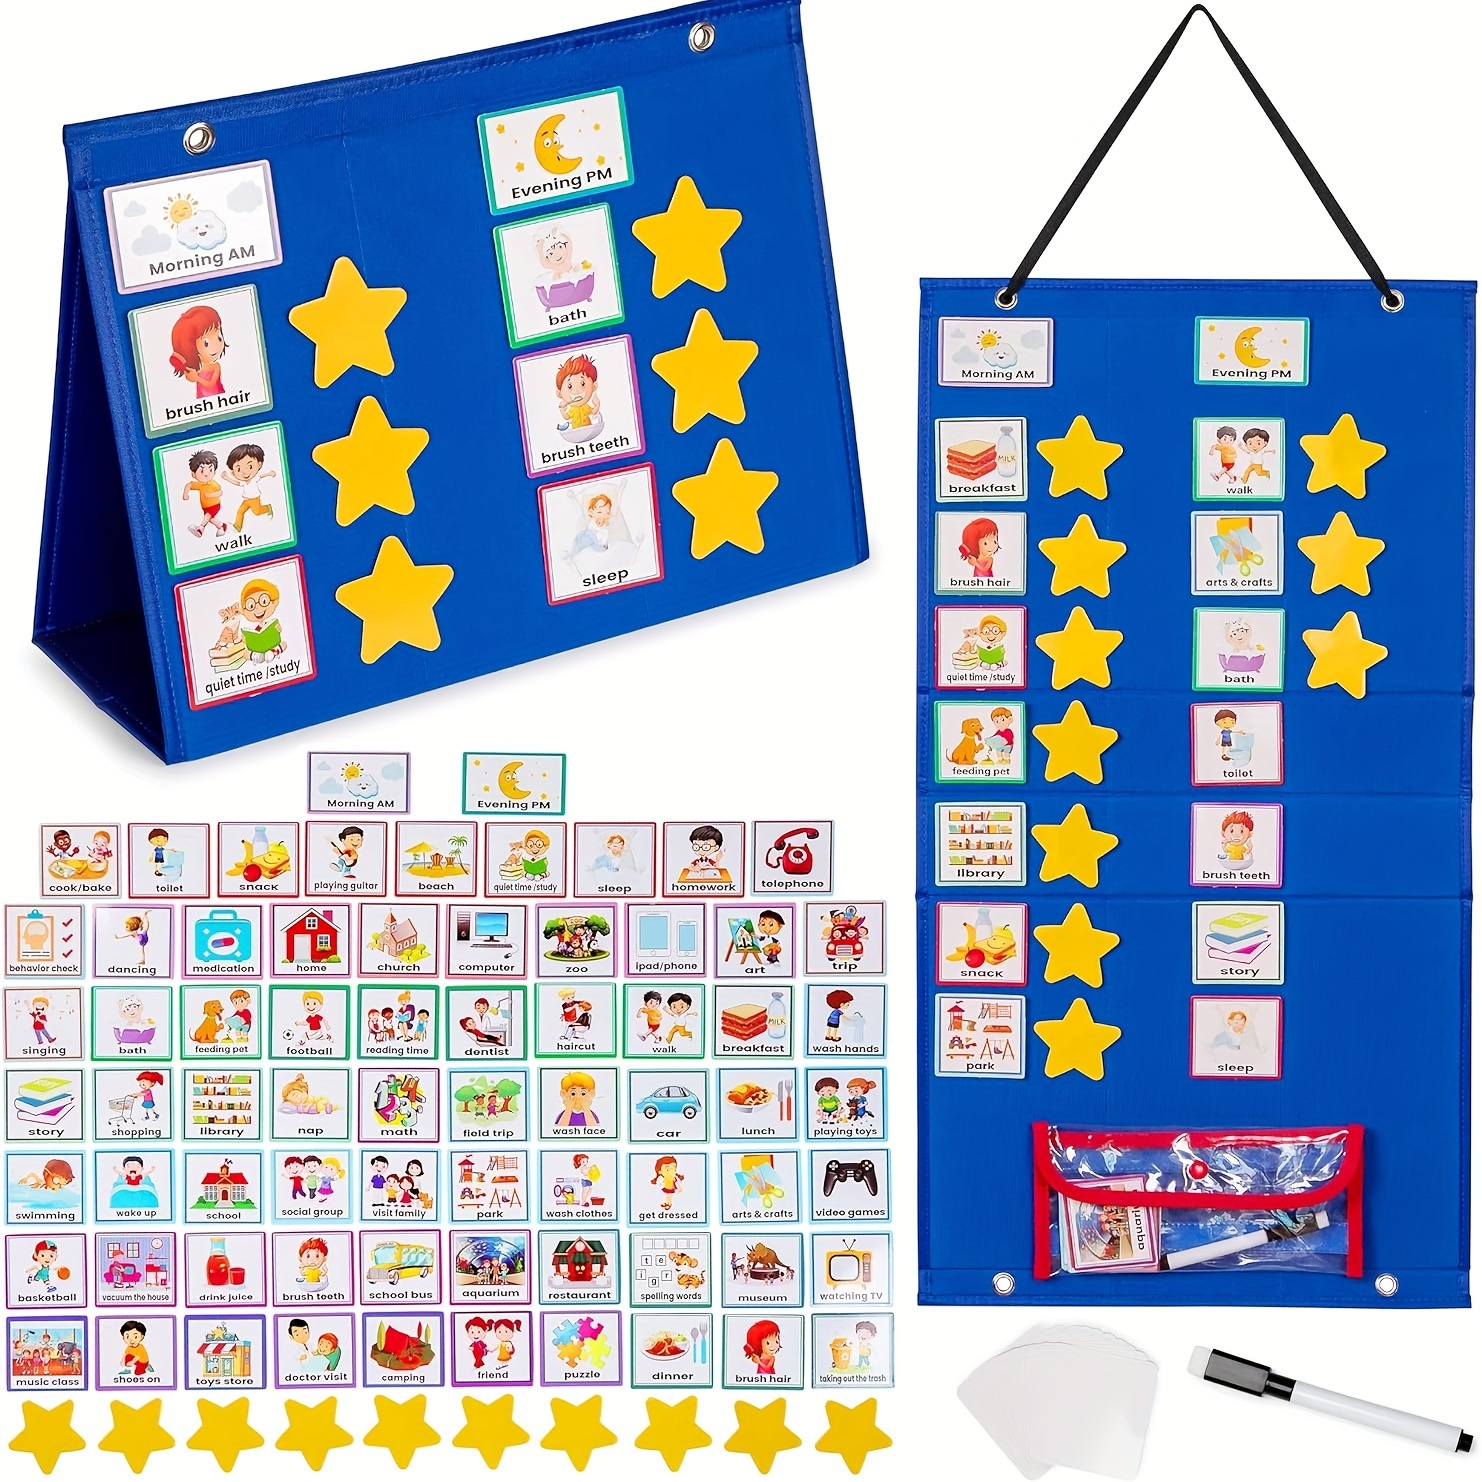 

Children's Large Visual Schedule For Classroom And Homeschooling - Daily Calendar, Suitable For Children's Use, 72 Activity Cards And 10 Blank Cards - Wall Chart Responsibility Plan